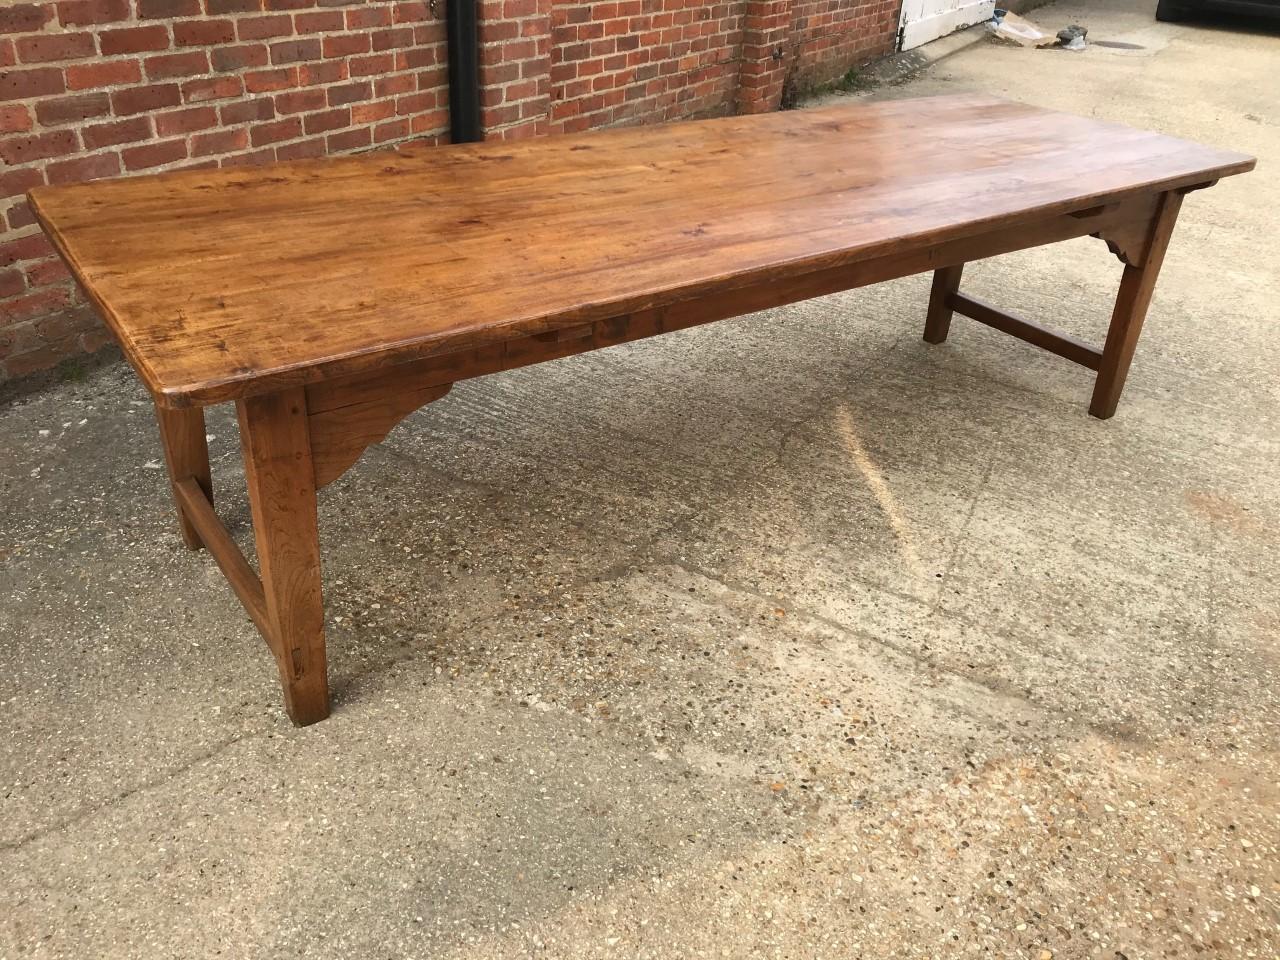 Late 19th century large pale elm farmhouse table. Table has a four plank beautifully figured top that stands on a pretty apron with end stretcher. Gorgeous table with alot of character. A exciting rare find.